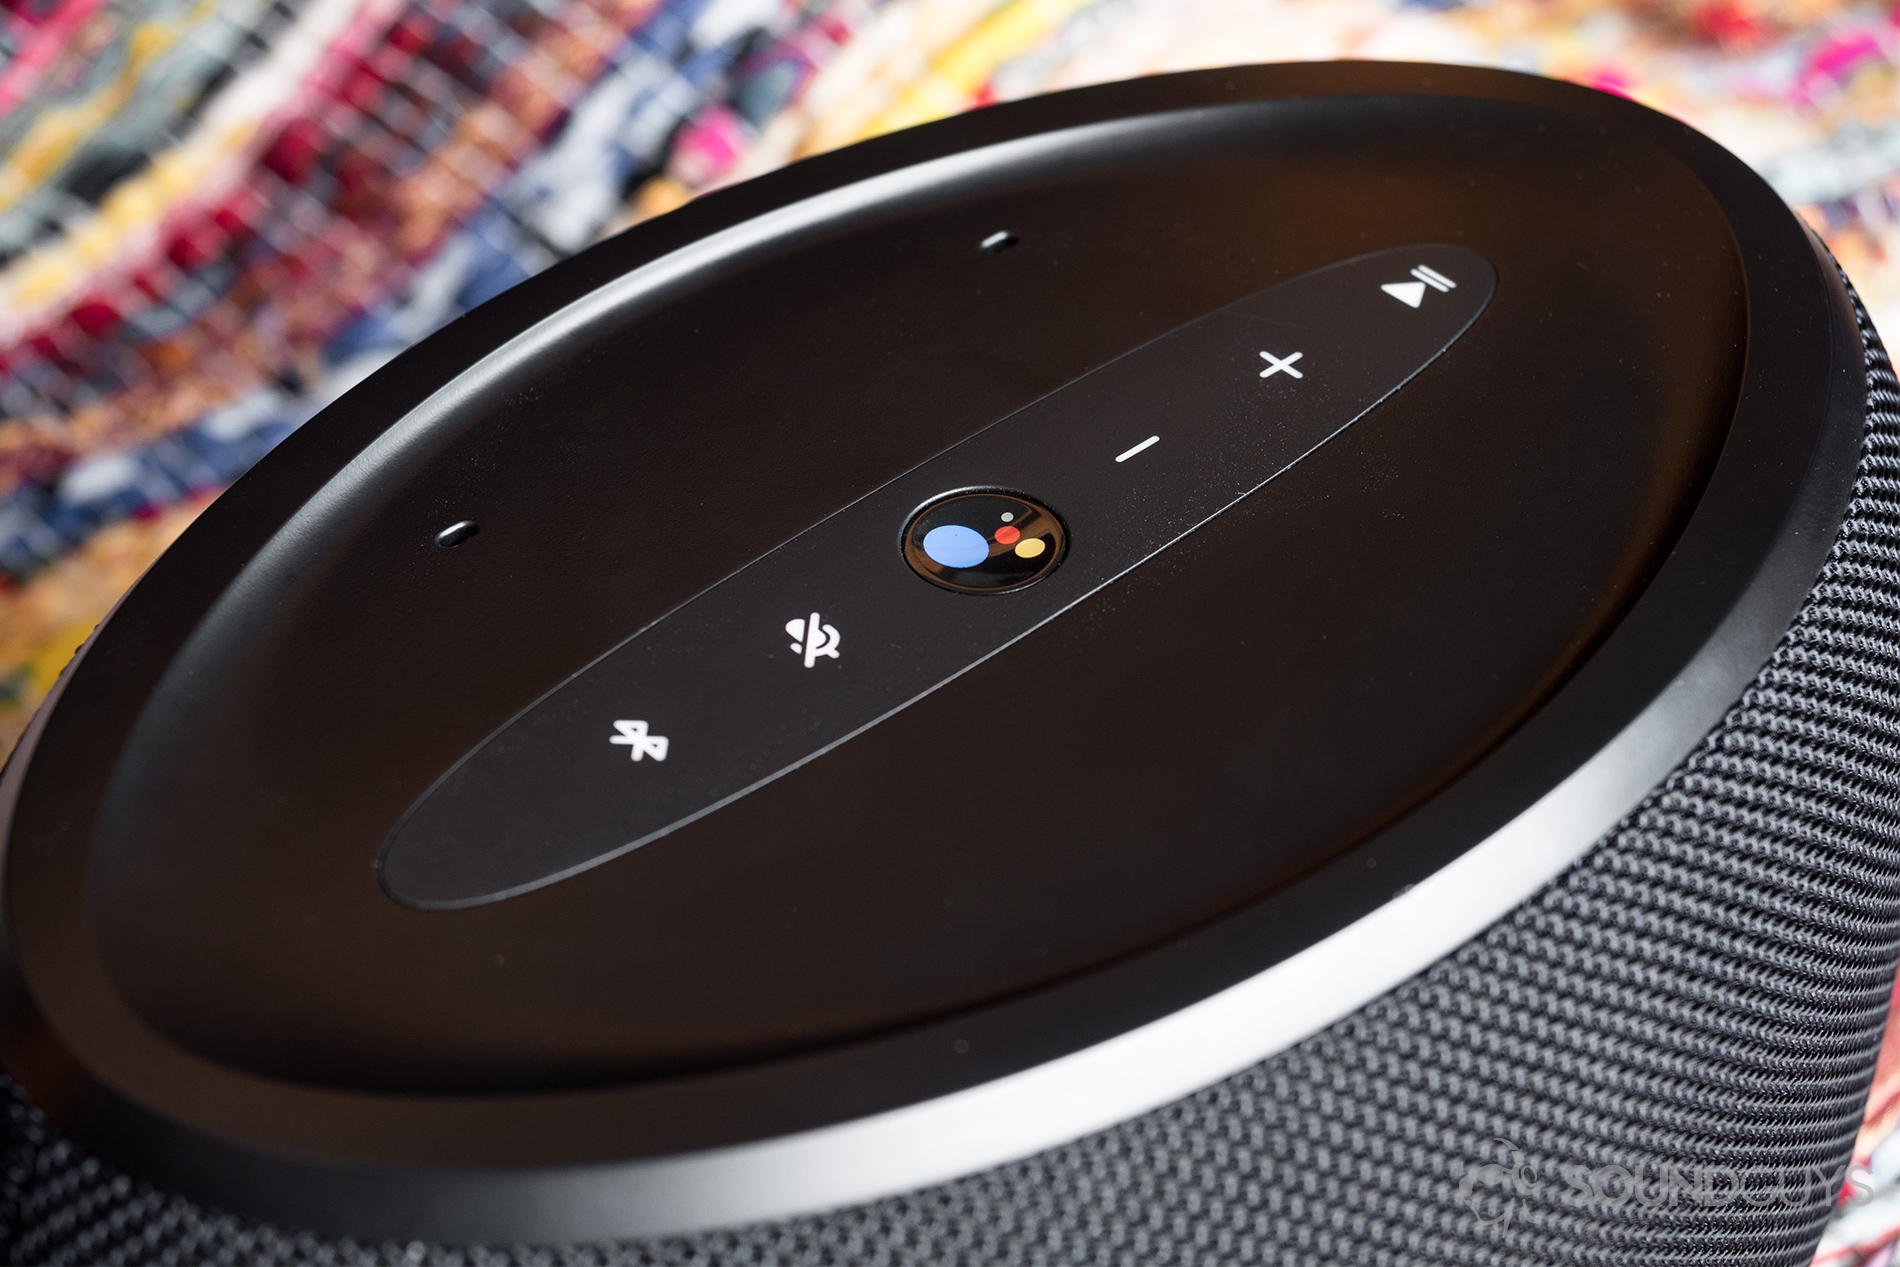 JBL Link 300 Google Assistant-integrated smart speaker: The speaker is viewed from a downward angle and runs diagonally across the screen. Featured are the controls on the top panel. In the centere is a colorized, Google Assistant button.